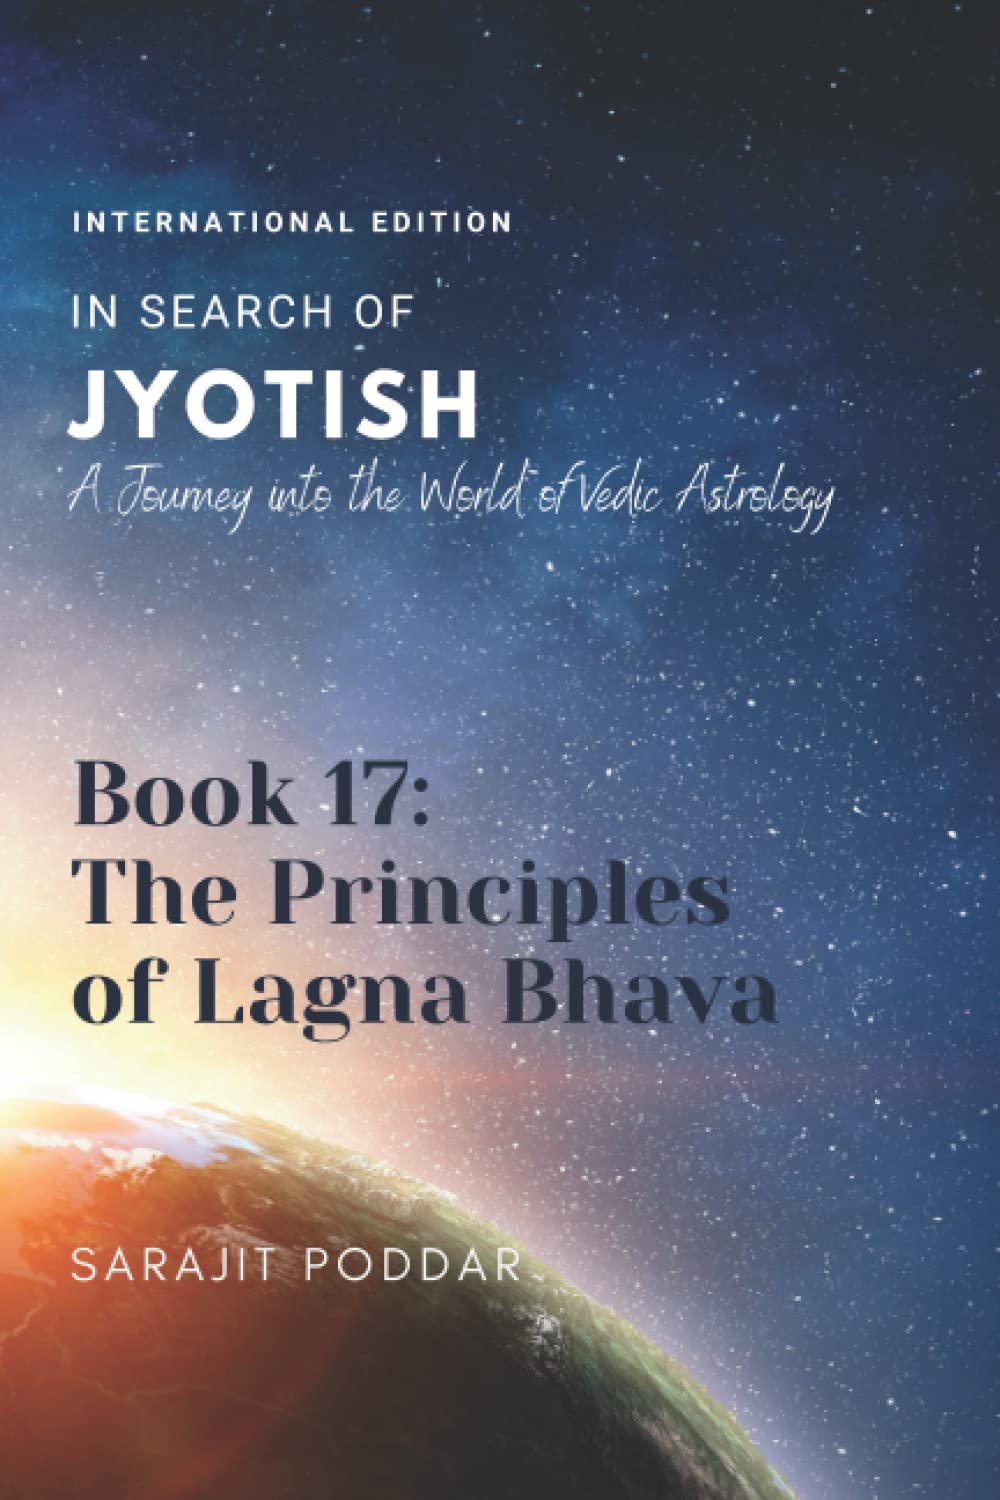 The Principles of Lagna Bhava: A Journey into the World of Vedic Astrology